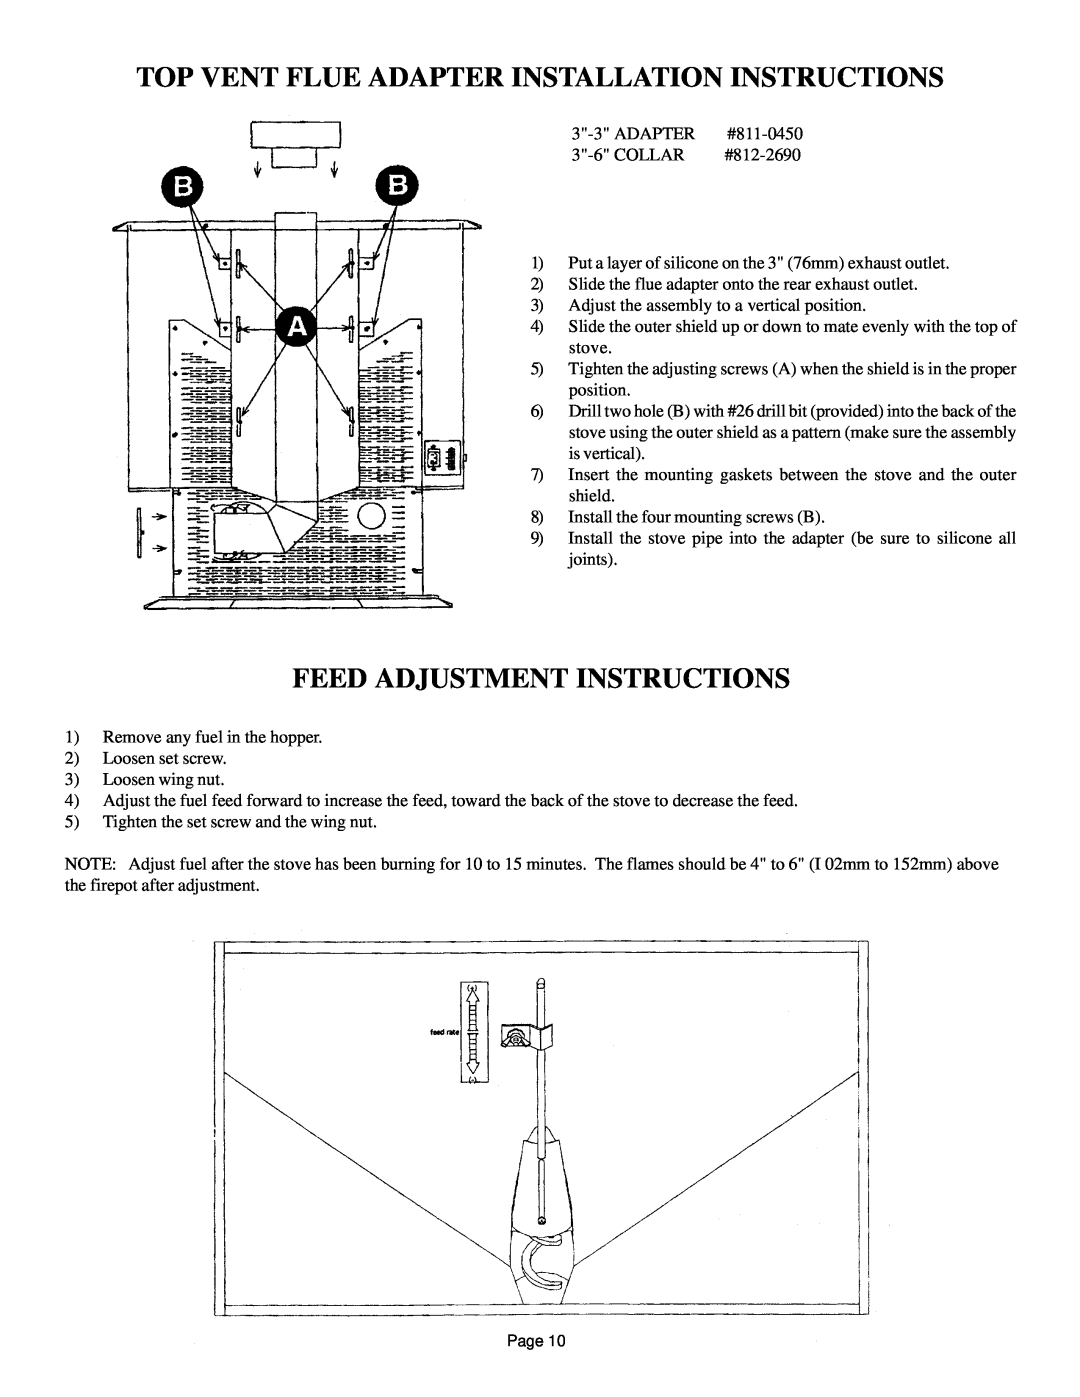 Hearth and Home Technologies 800 owner manual Top Vent Flue Adapter Installation Instructions, Feed Adjustment Instructions 